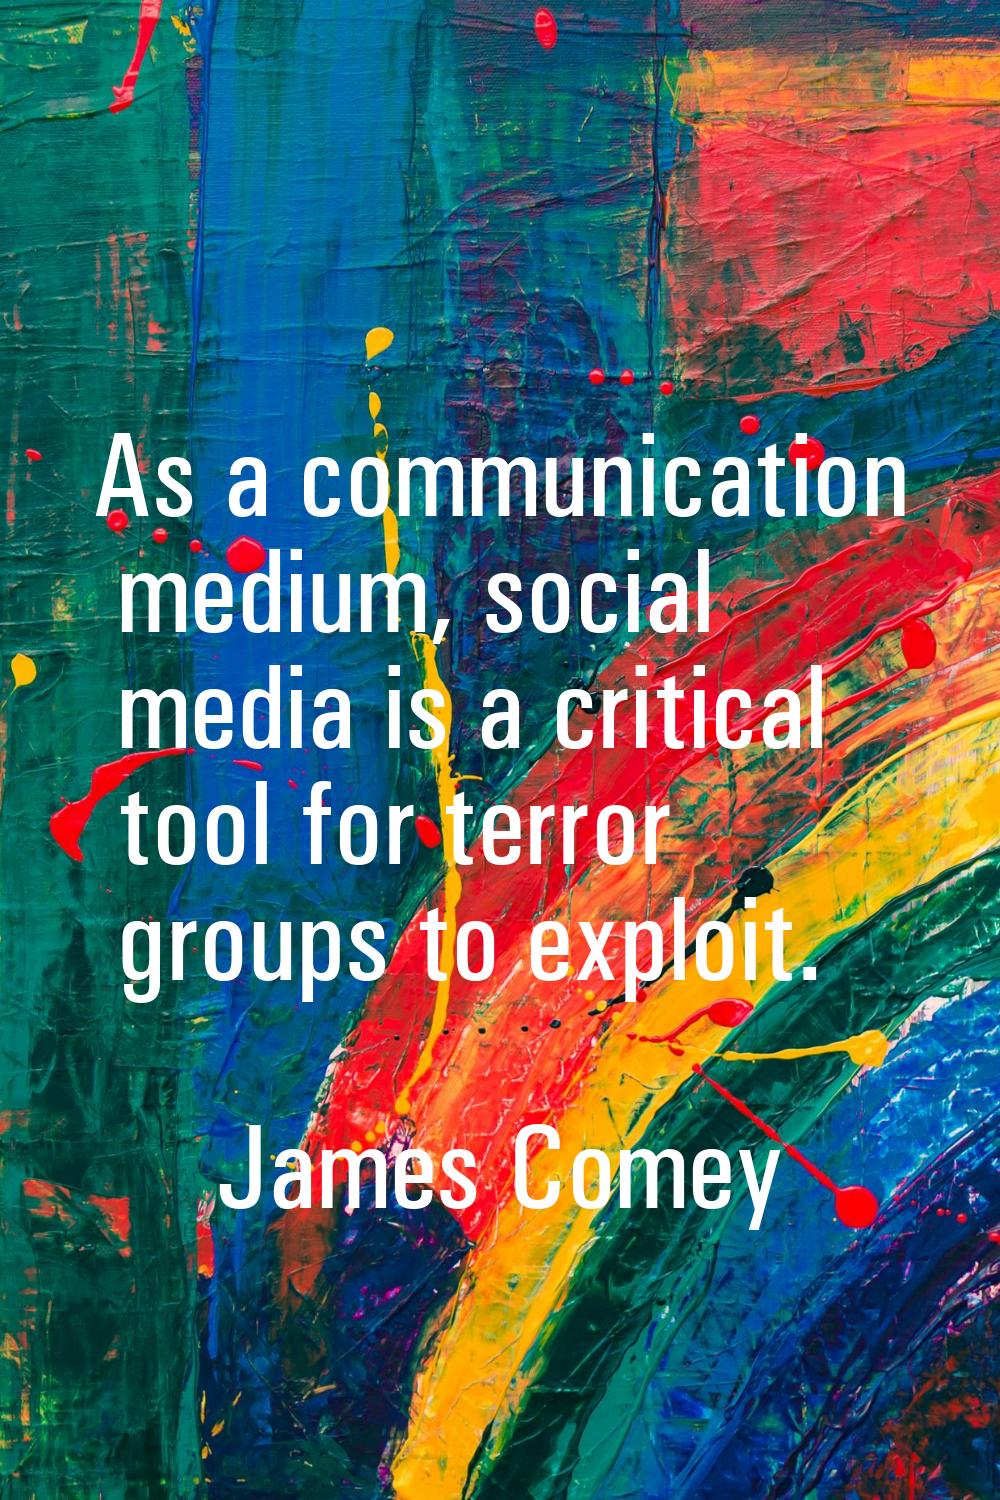 As a communication medium, social media is a critical tool for terror groups to exploit.